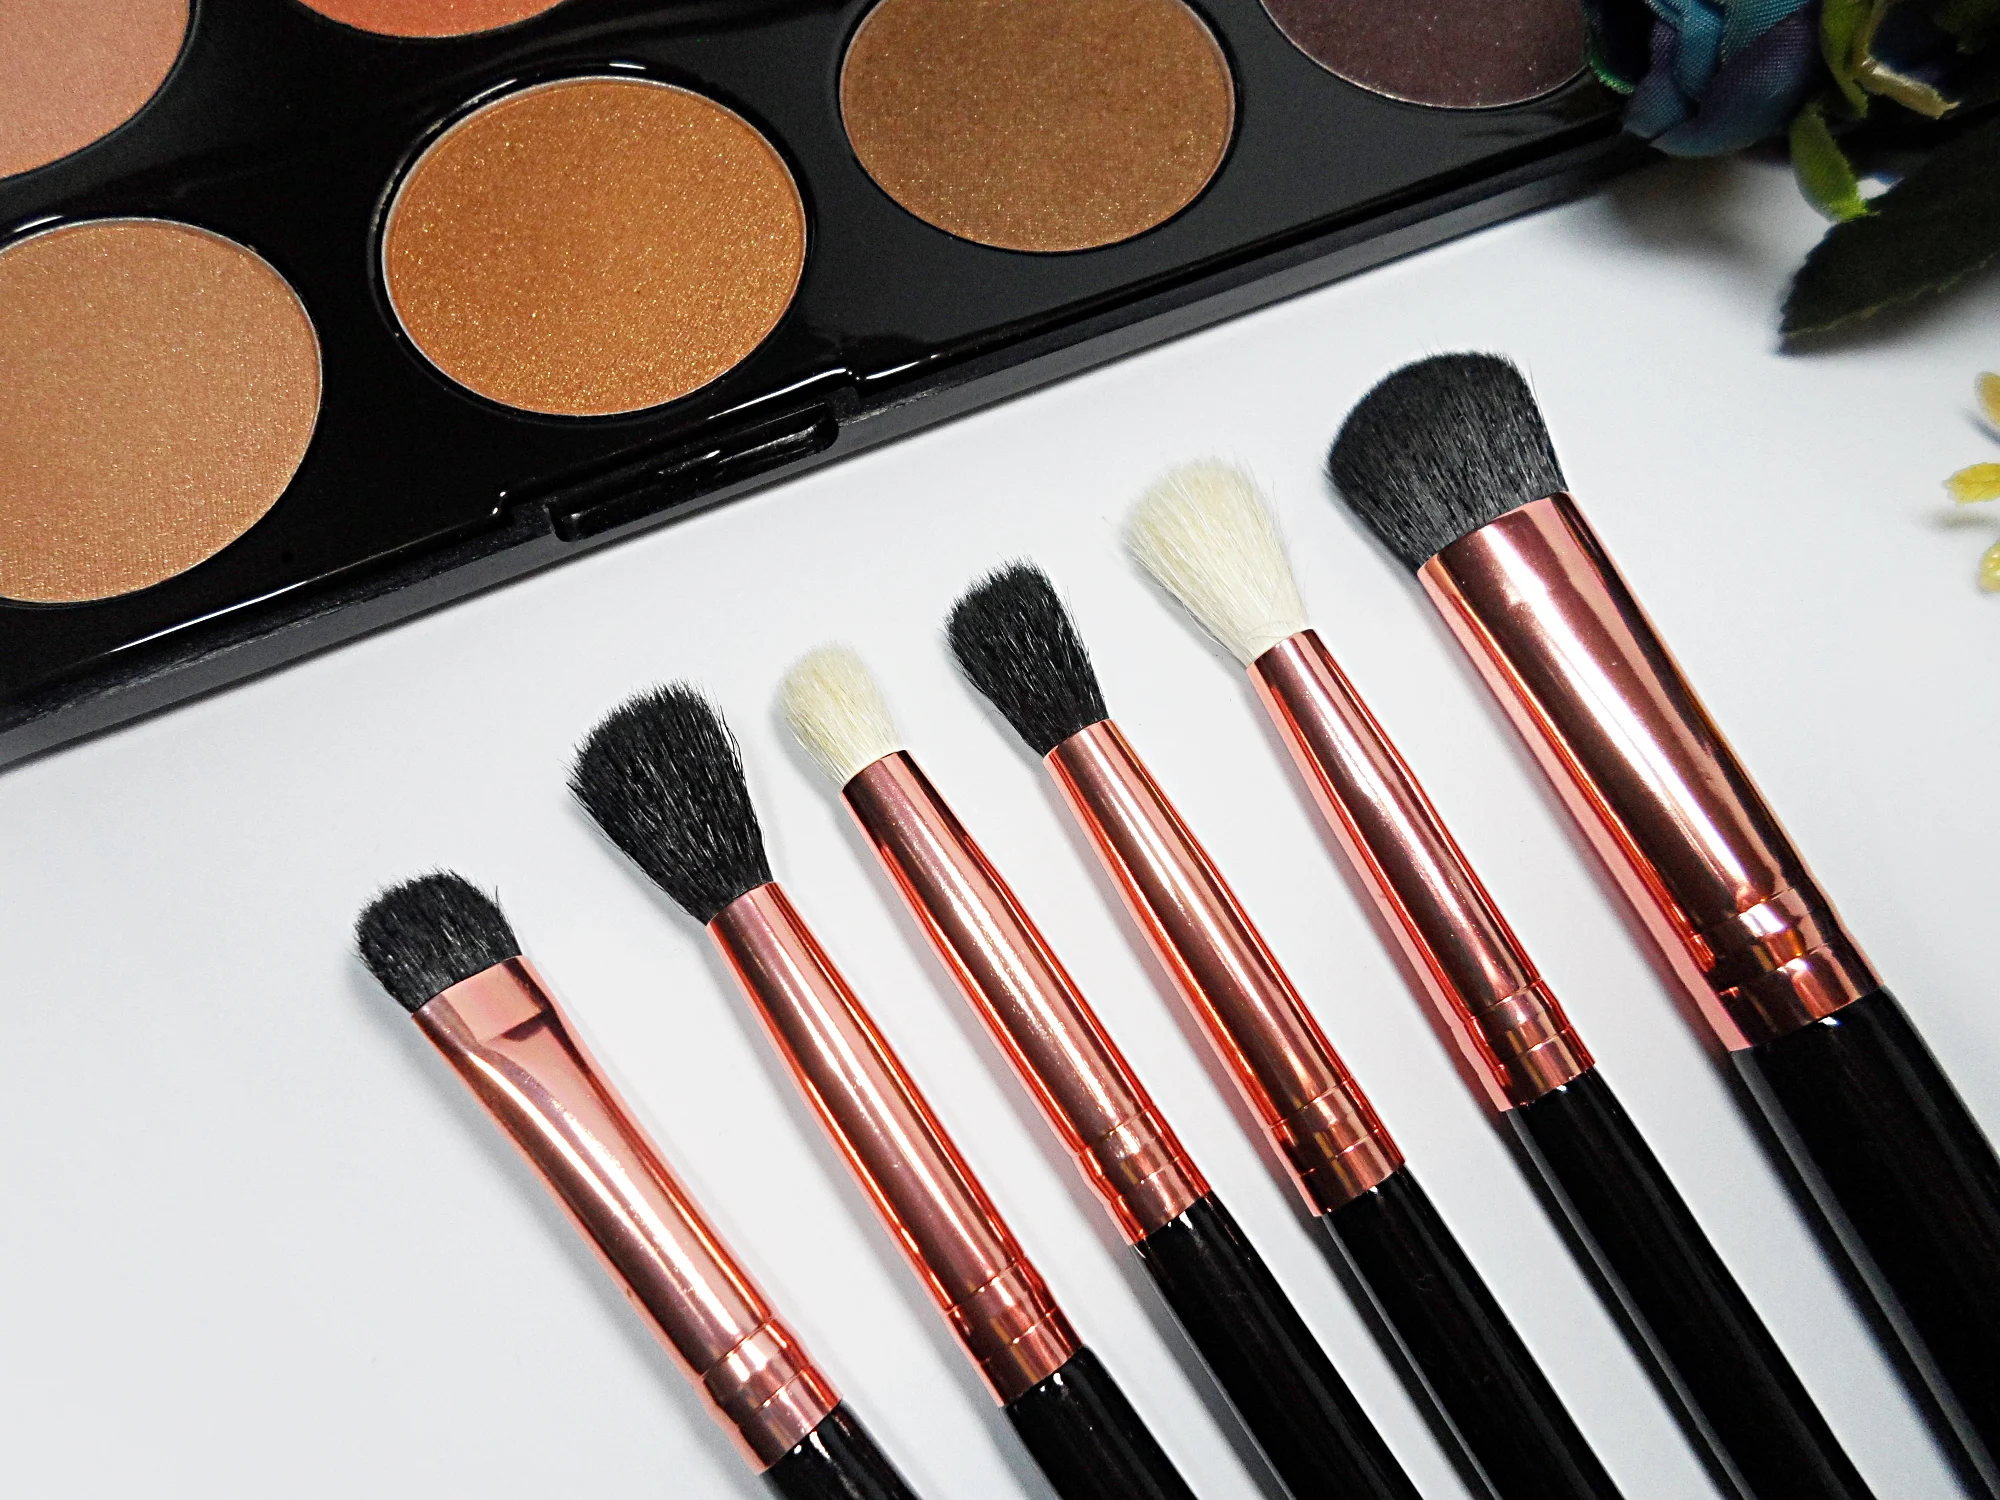 close-up picture of professional and affordale brushes laying on white background in a studio